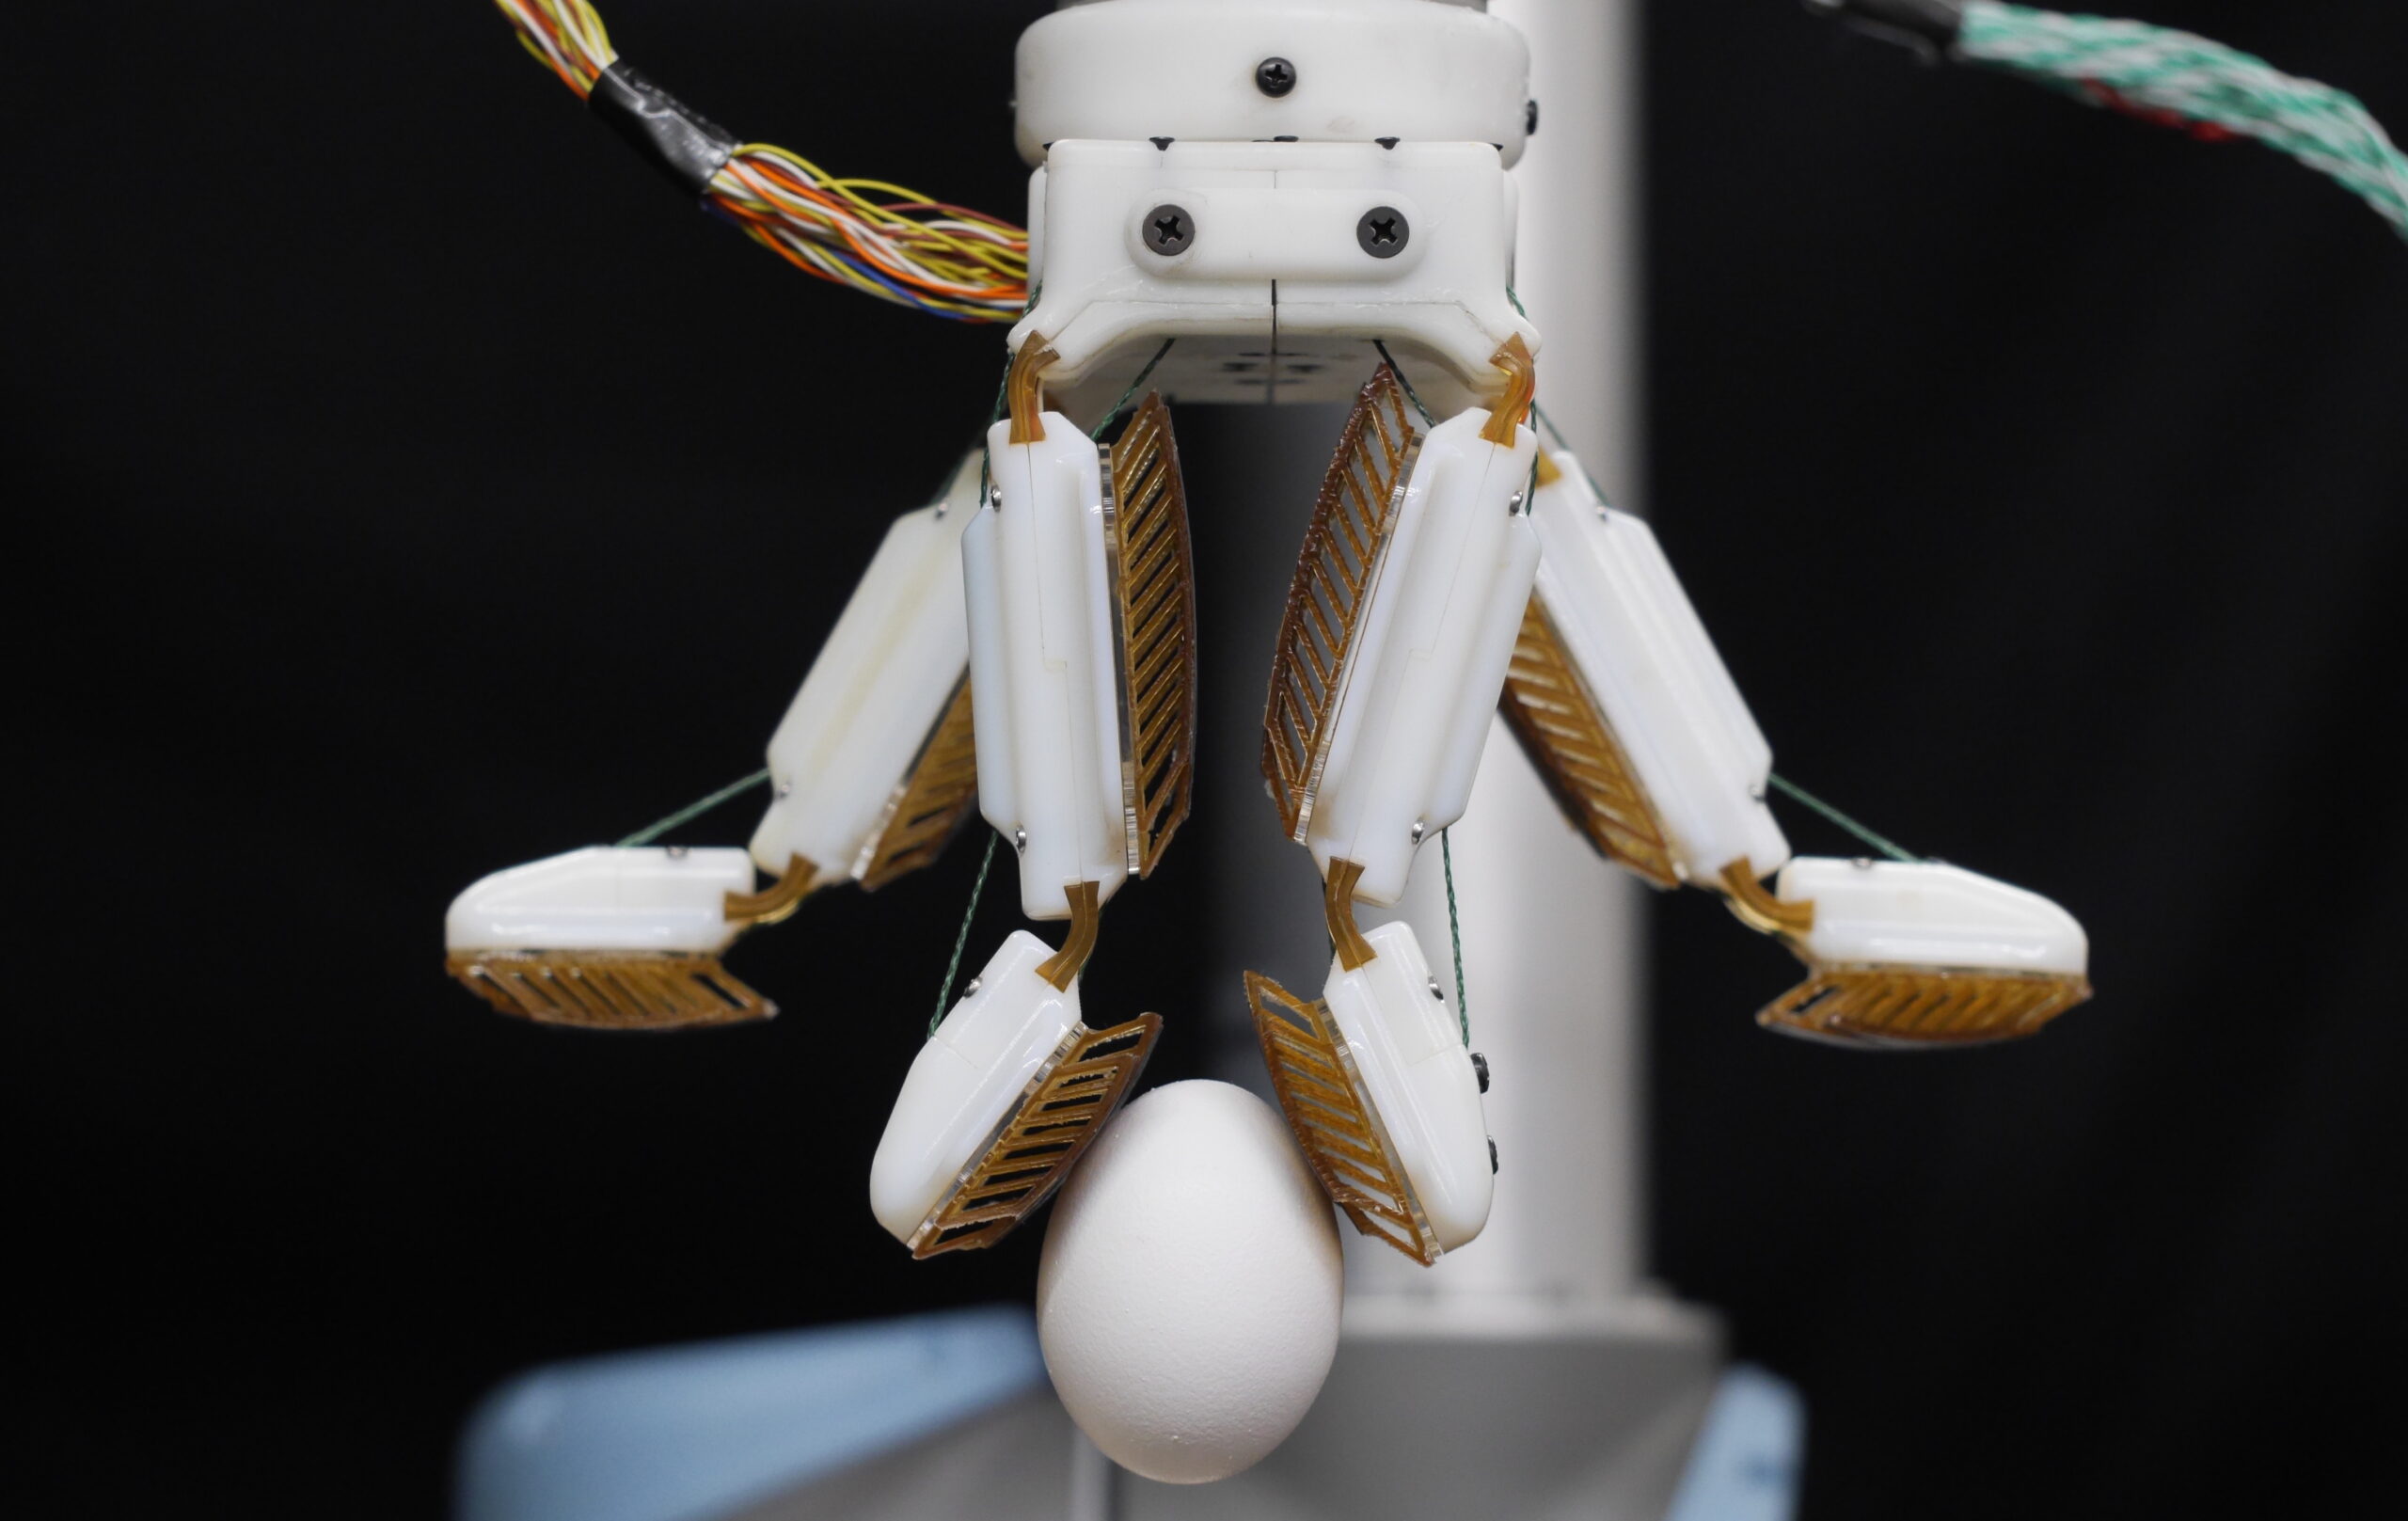 Engineers created a robotic hand with a gecko-like grip